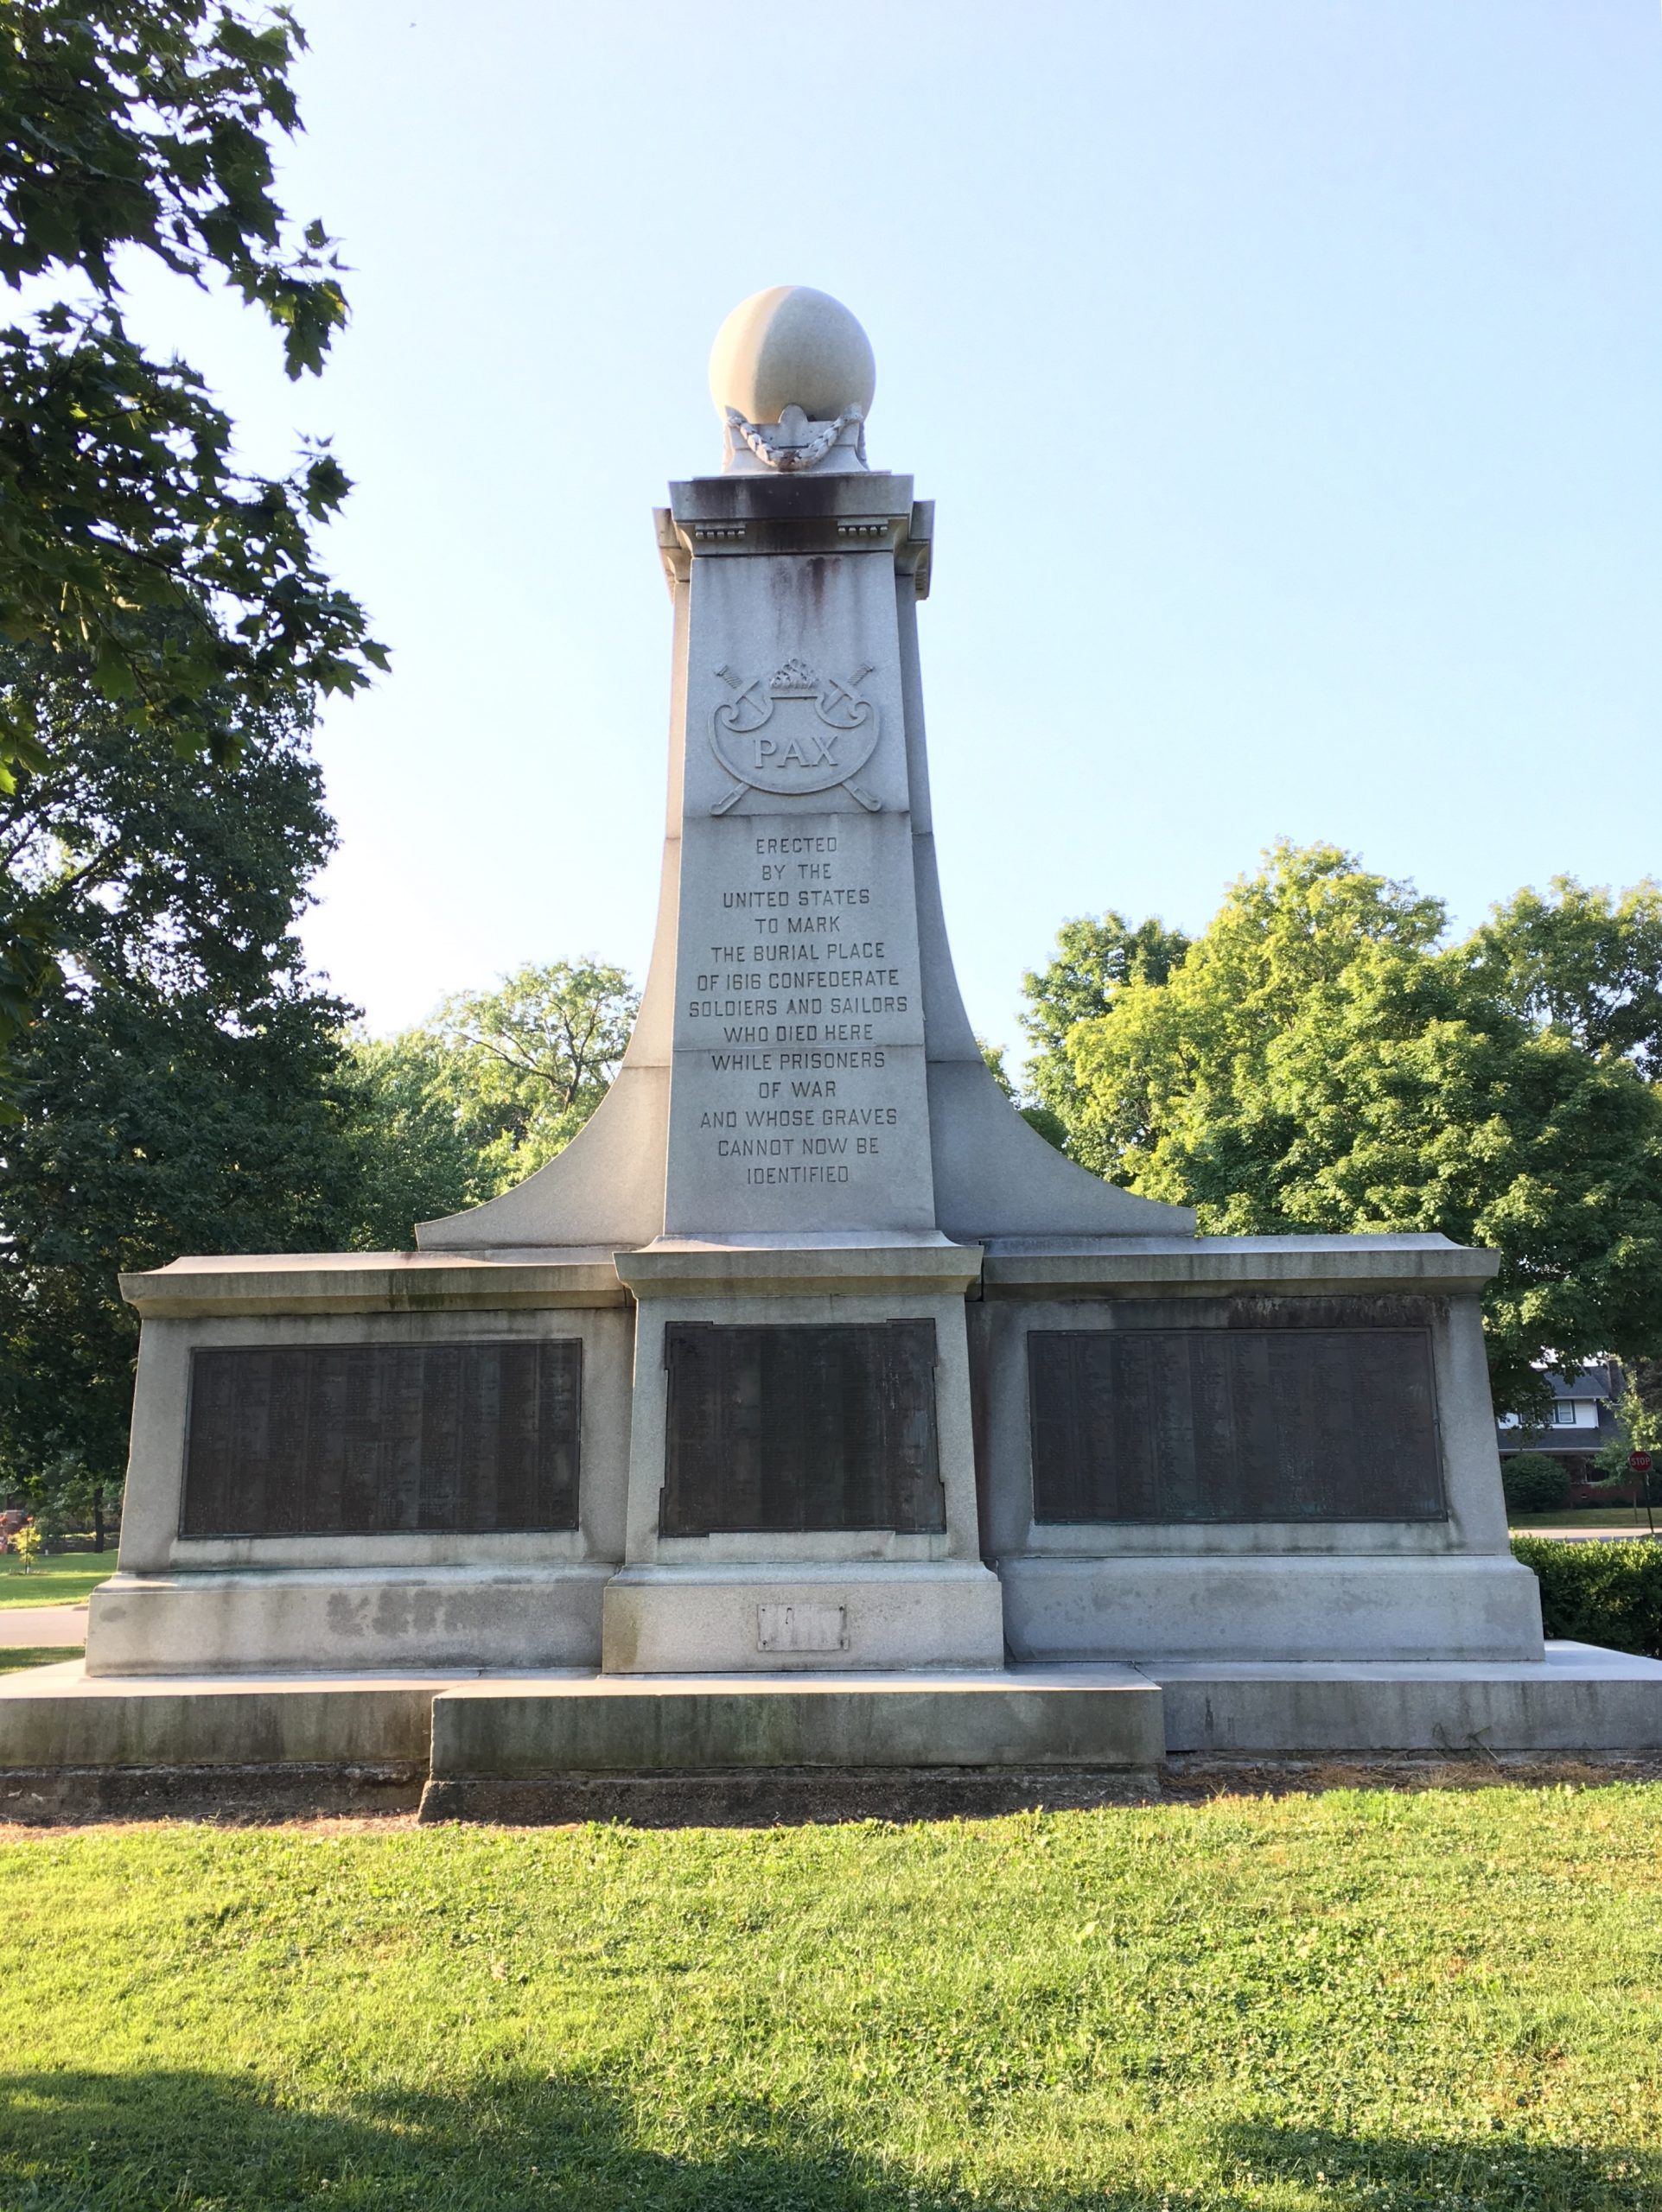 The white stone monument topped by a sphere has three large plaques on the base and the word "PAX" followed by the words "Erected by the United States to mark the burial place of 1616 confederate soldiers and sailors who died here while prisoners of war and whose graves cannot now be identified."